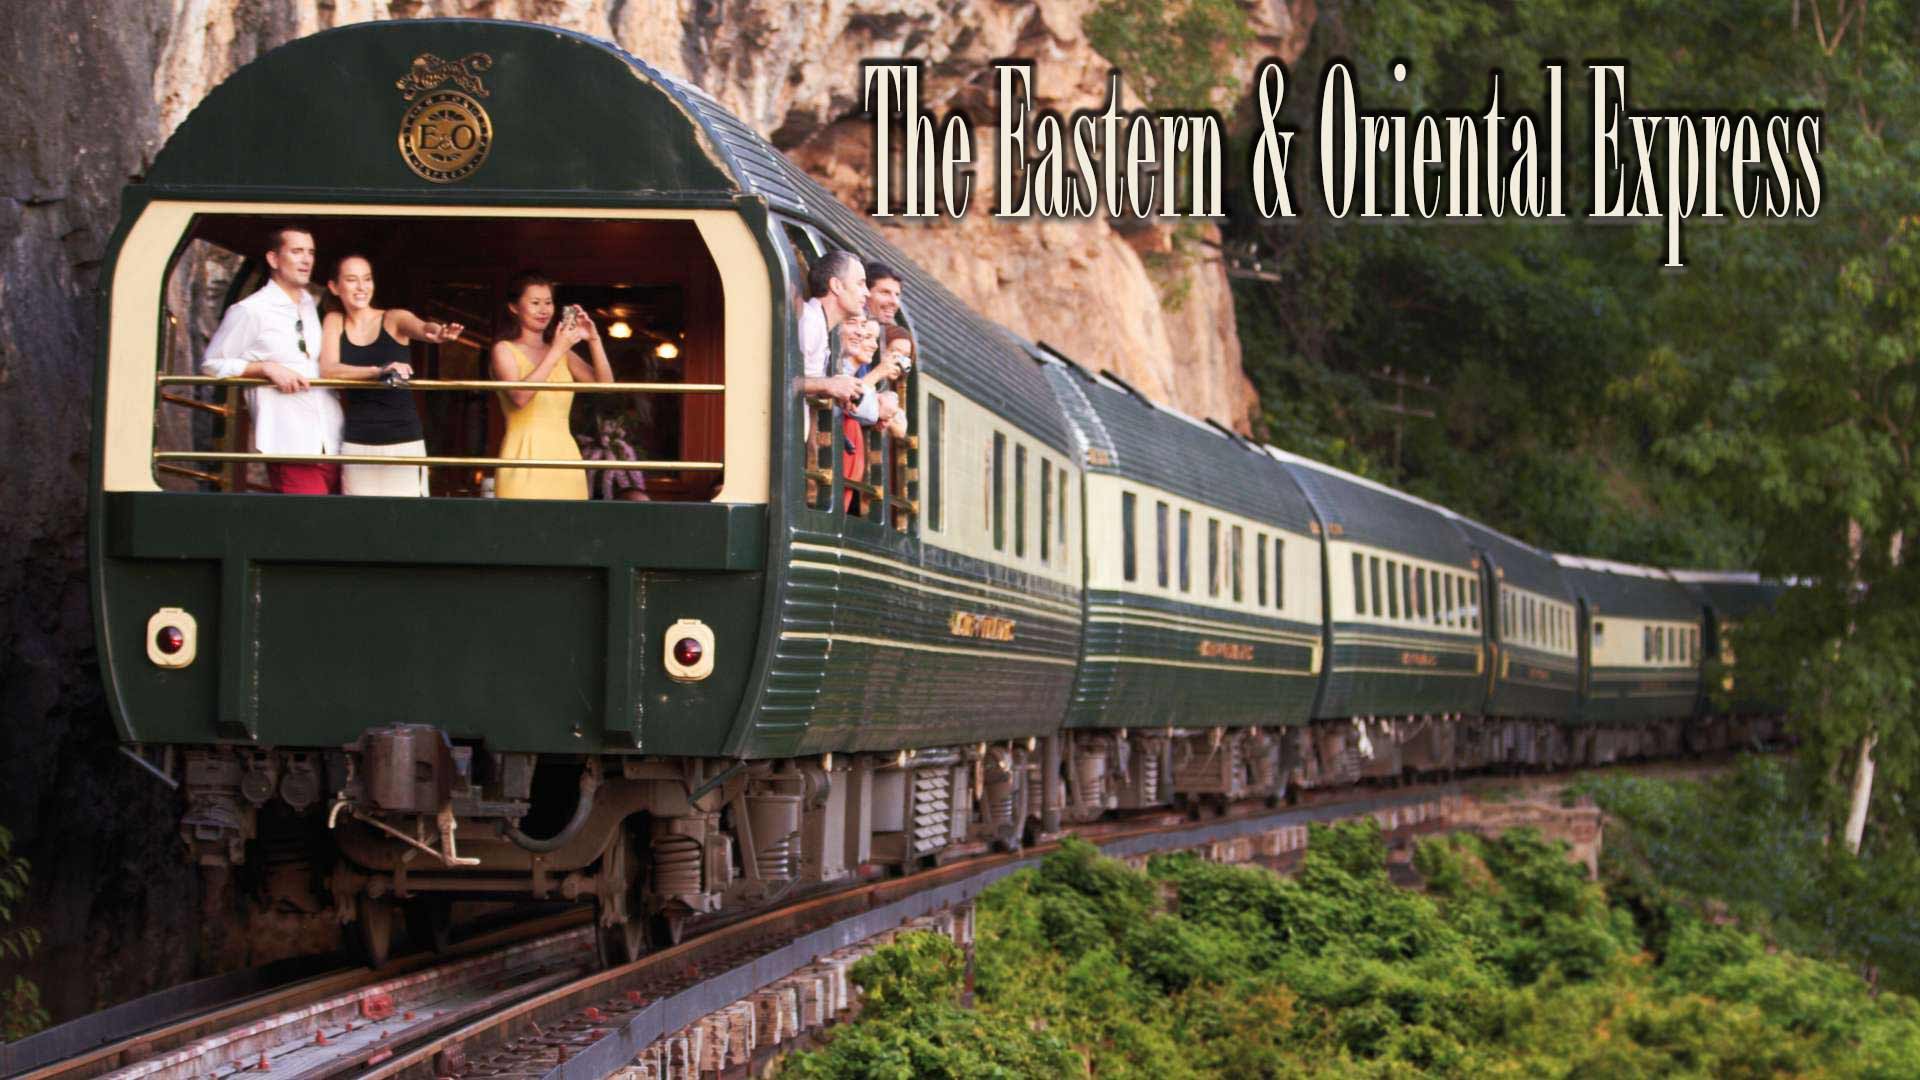 The Eastern & Oriental Express